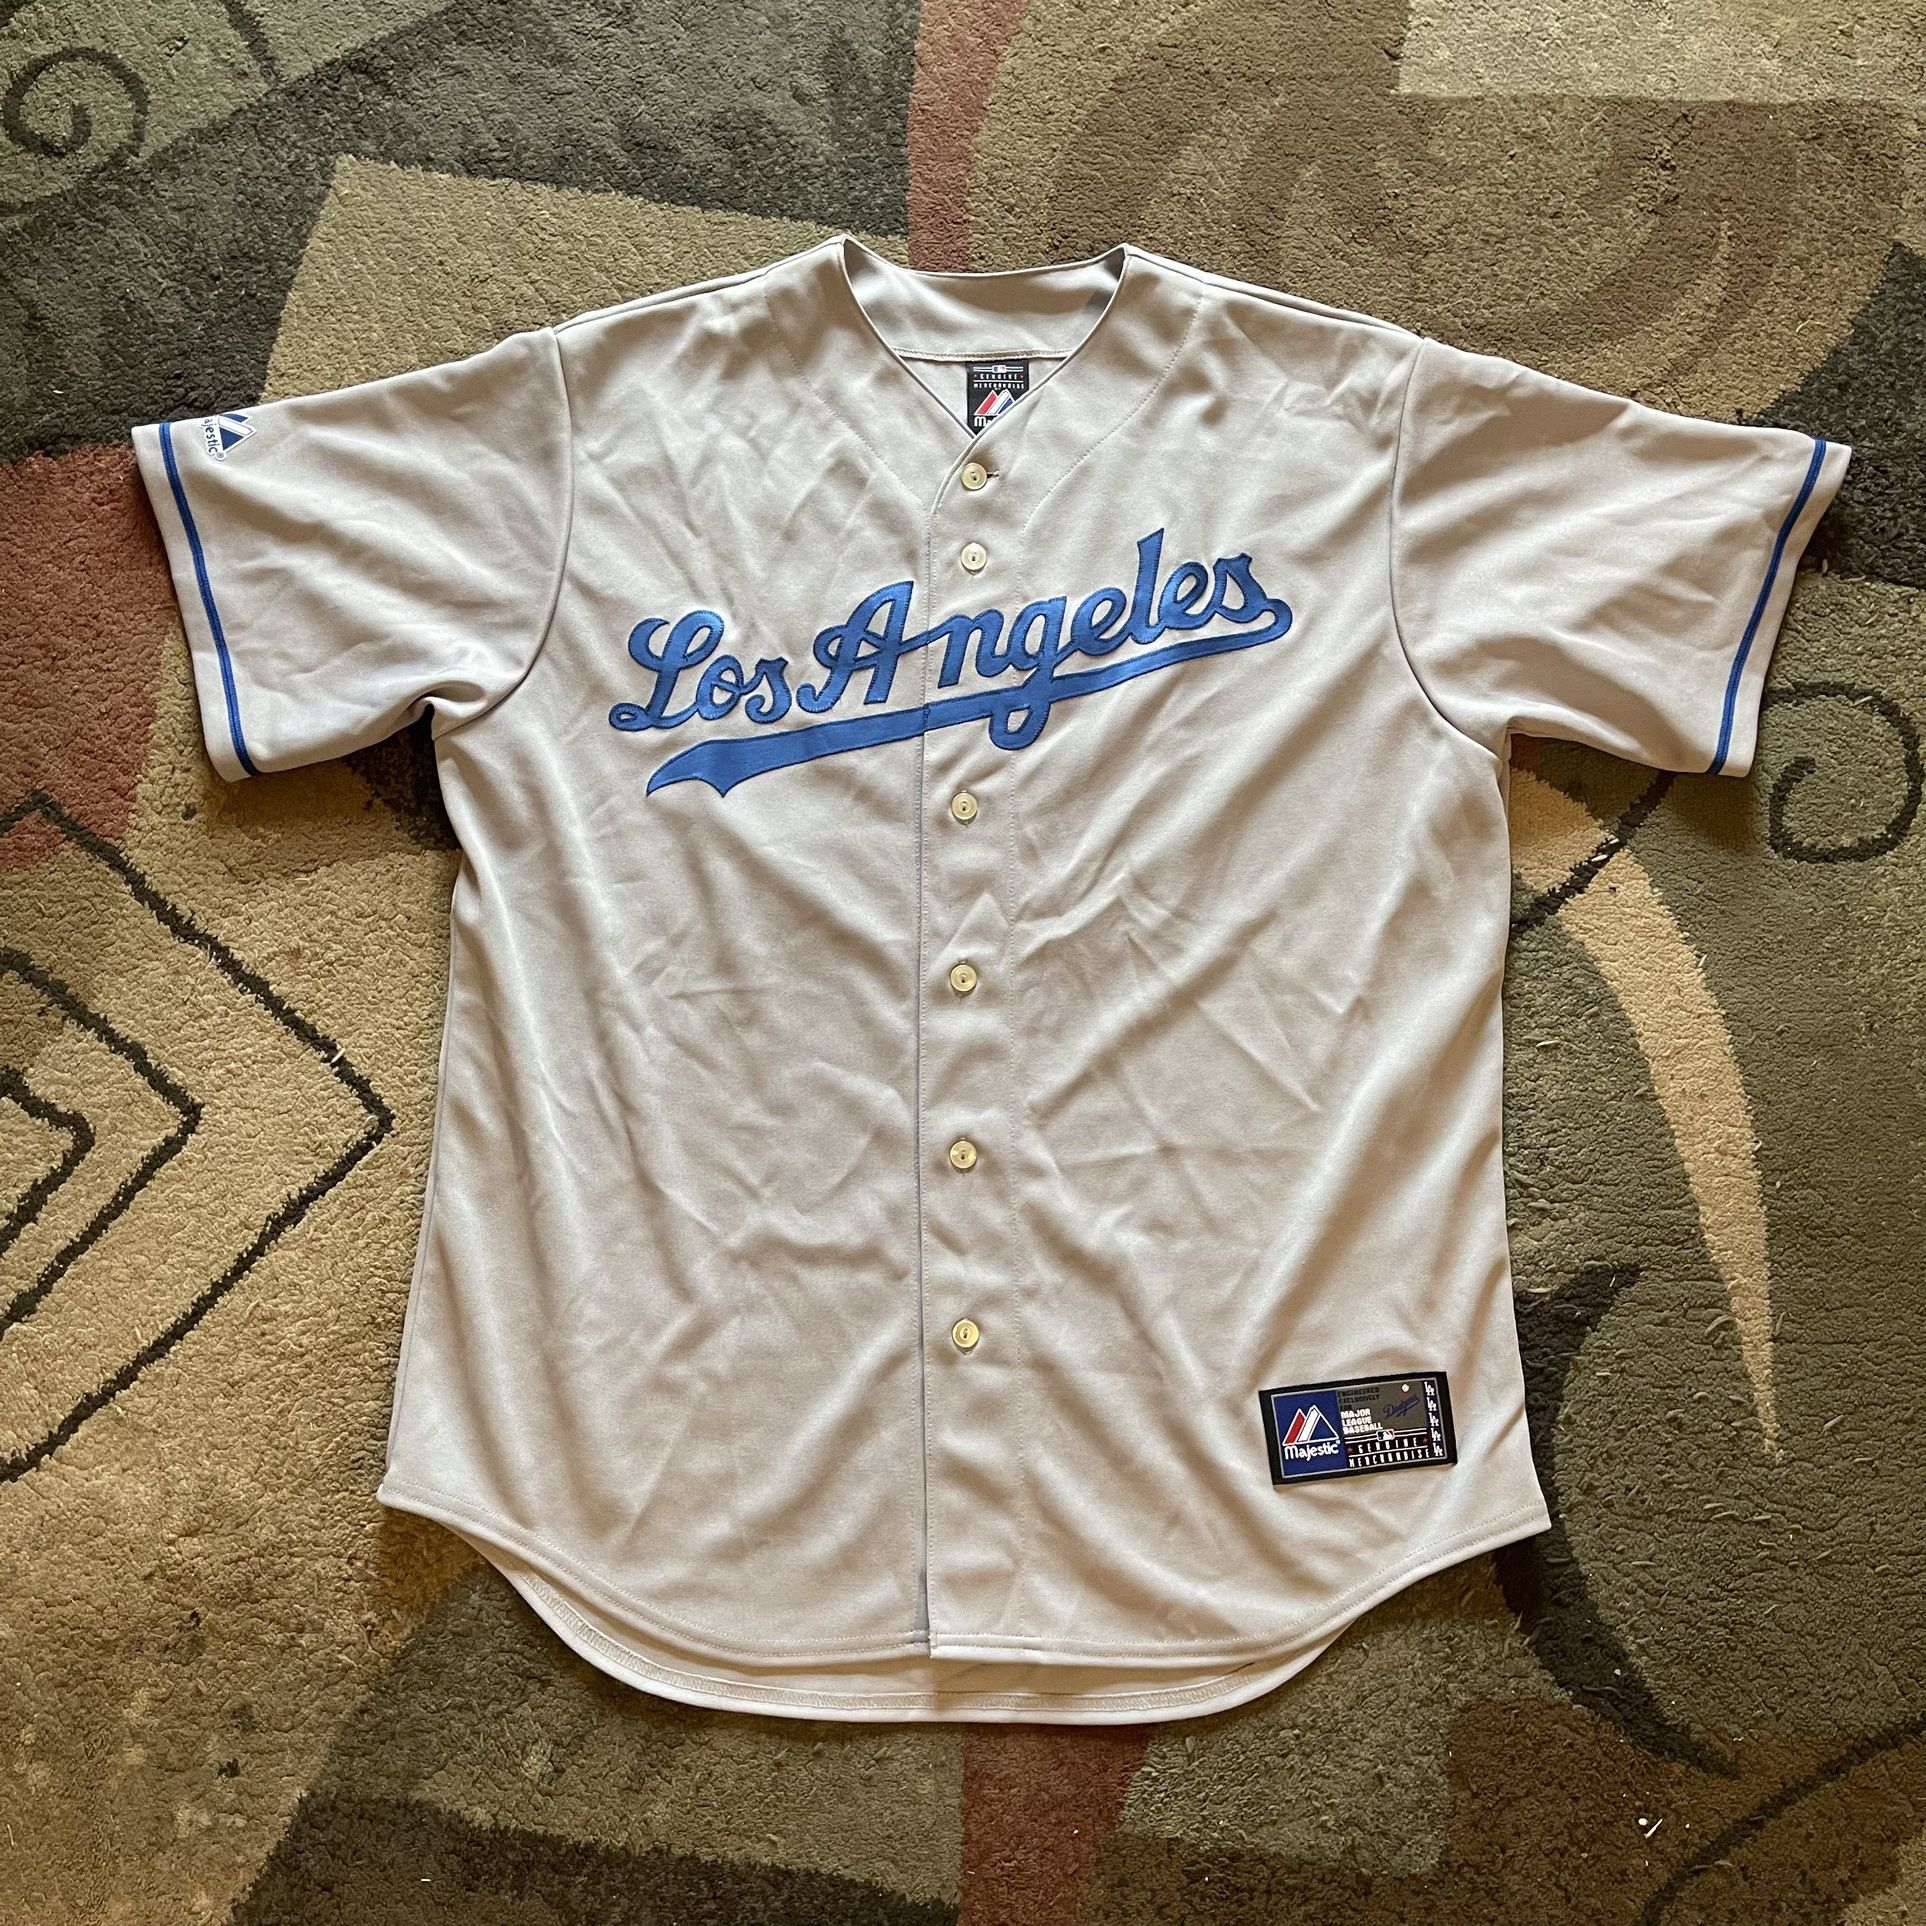 Authentic Majestic MLB Los Angeles Dodgers Russell Martin Baseball Jersey